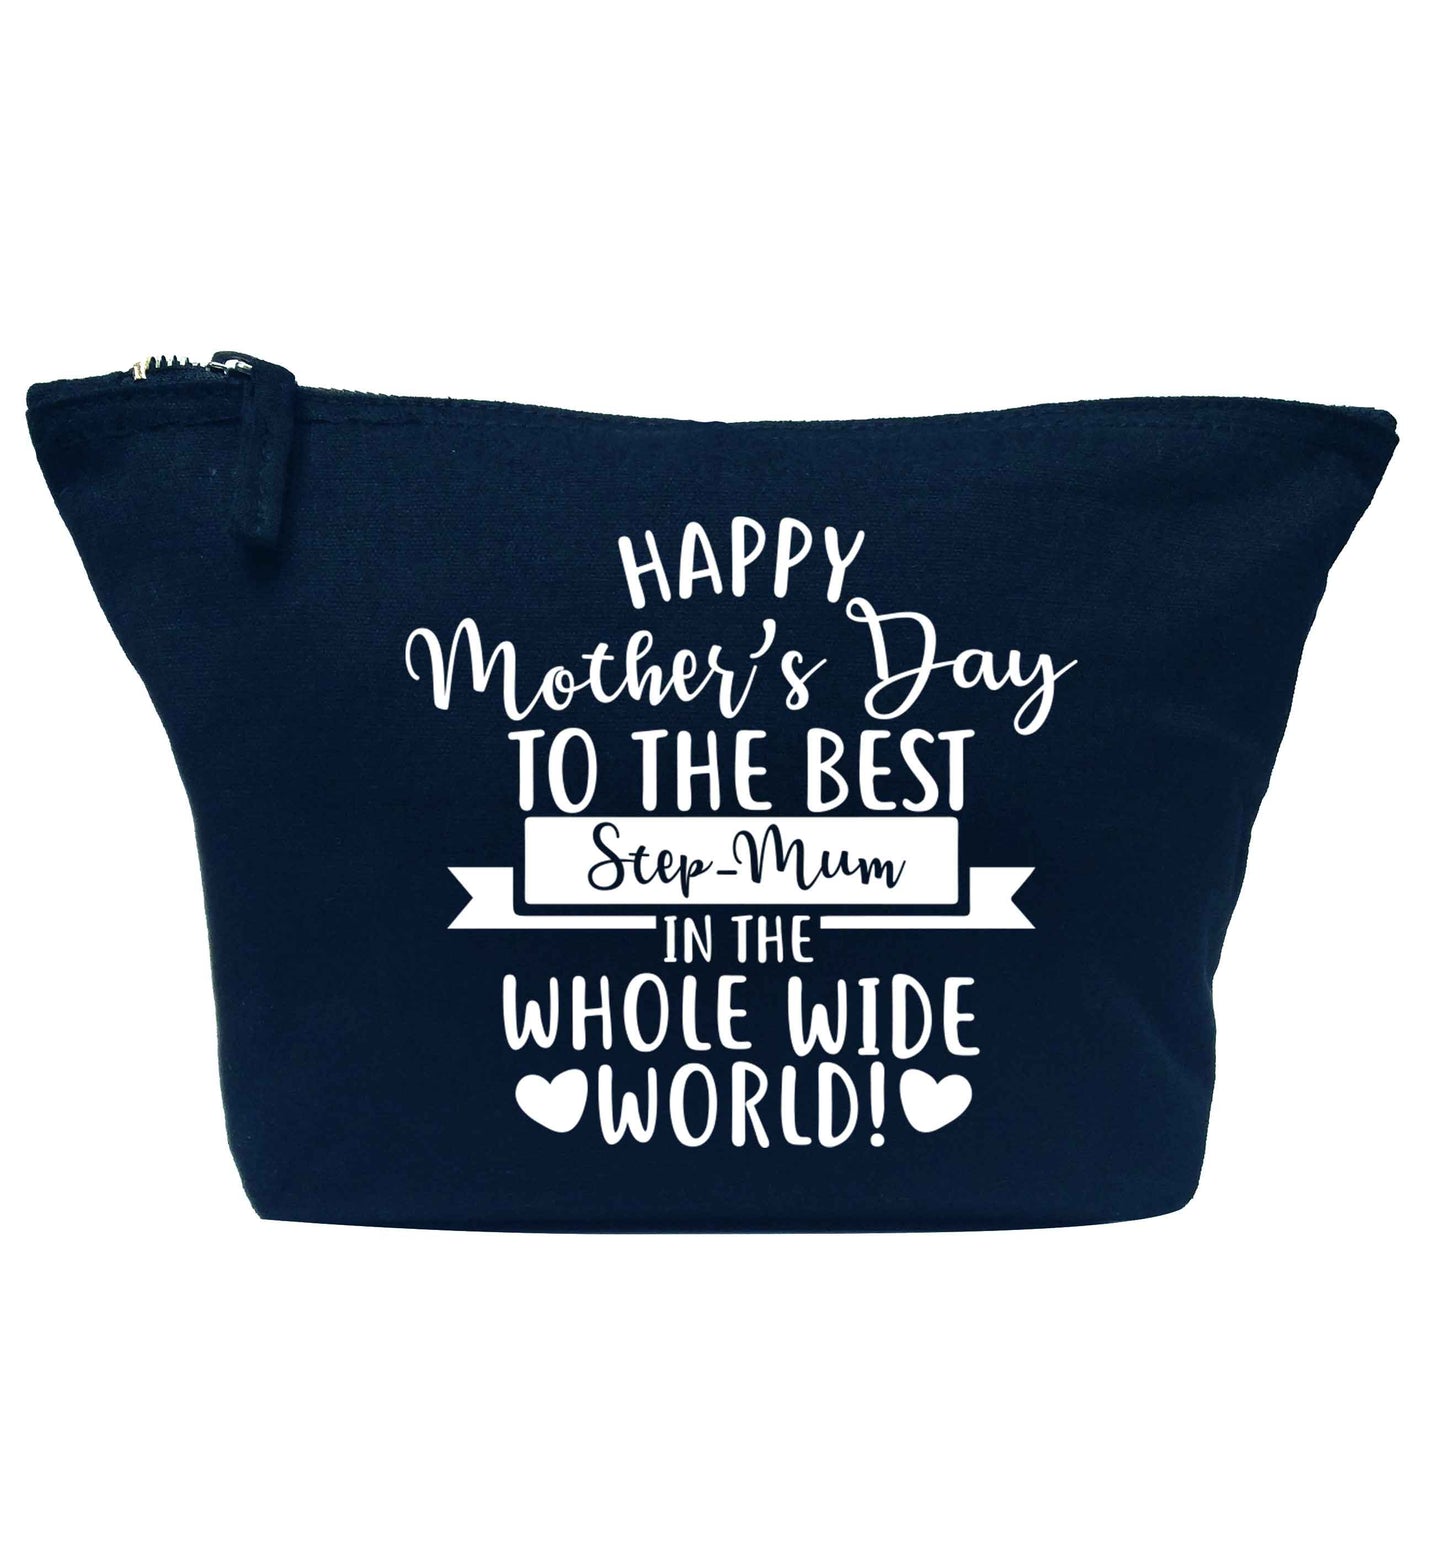 Happy mother's day to the best step-mum in the world navy makeup bag